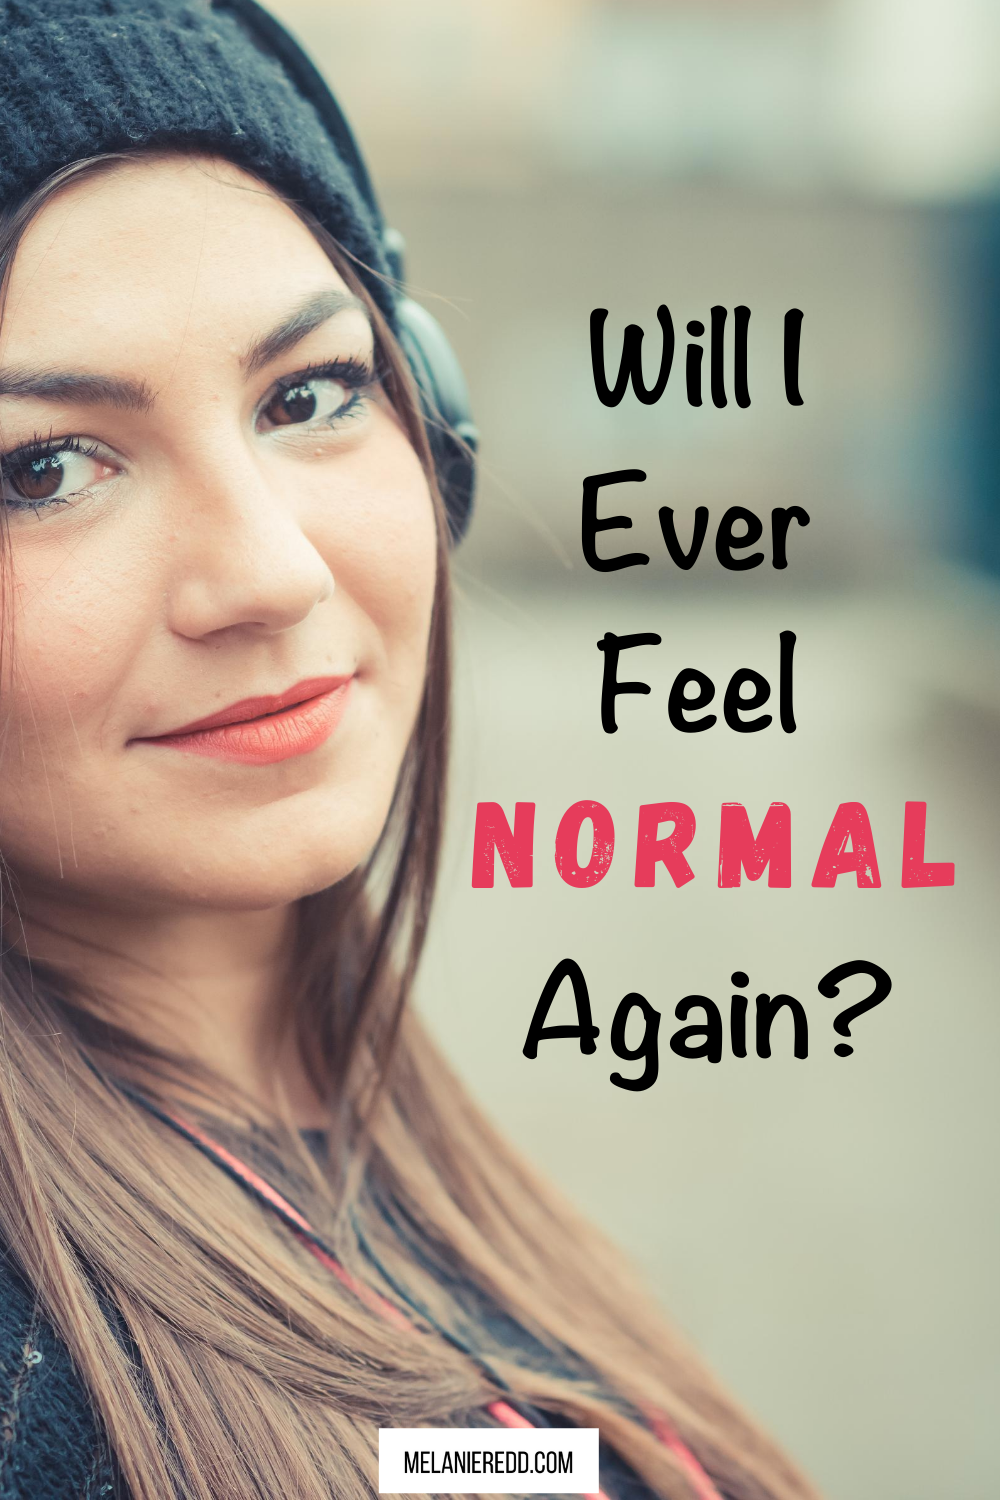 Do you find yourself wondering, Will I Ever Feel Normal Again? Whoever thought that feeling normal would be something we’d desire! But, we are living in that day. Why not drop by to get some very practical tips on how to bring aa little normalcy back into your world? #normal #normalcy #normalagain #regularlife #feelbetter